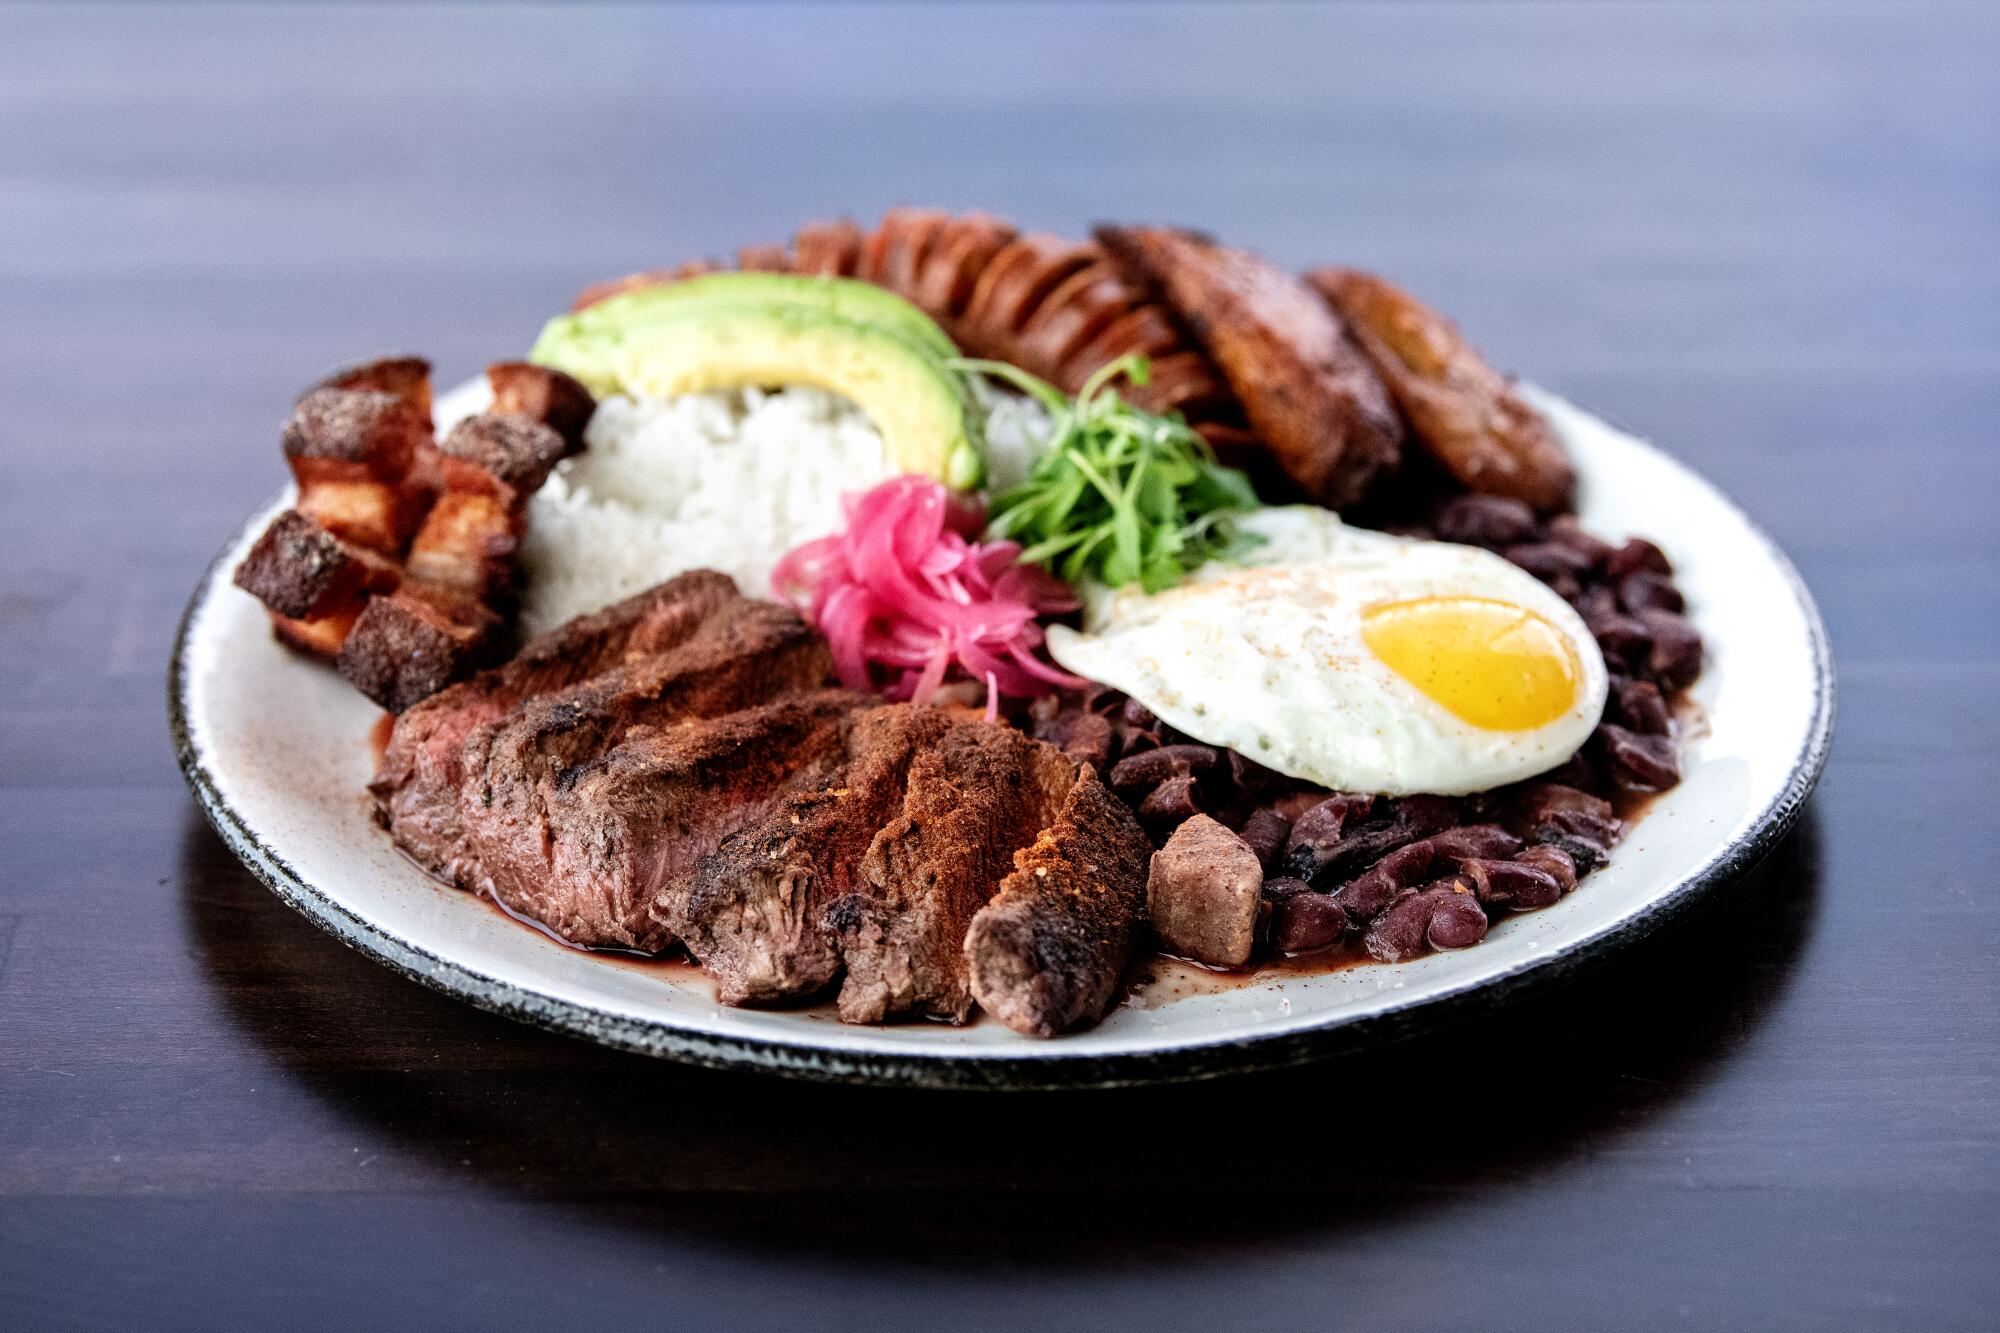 A plate with a variety of meats, plus rice, a slice of avocado and a fried egg.